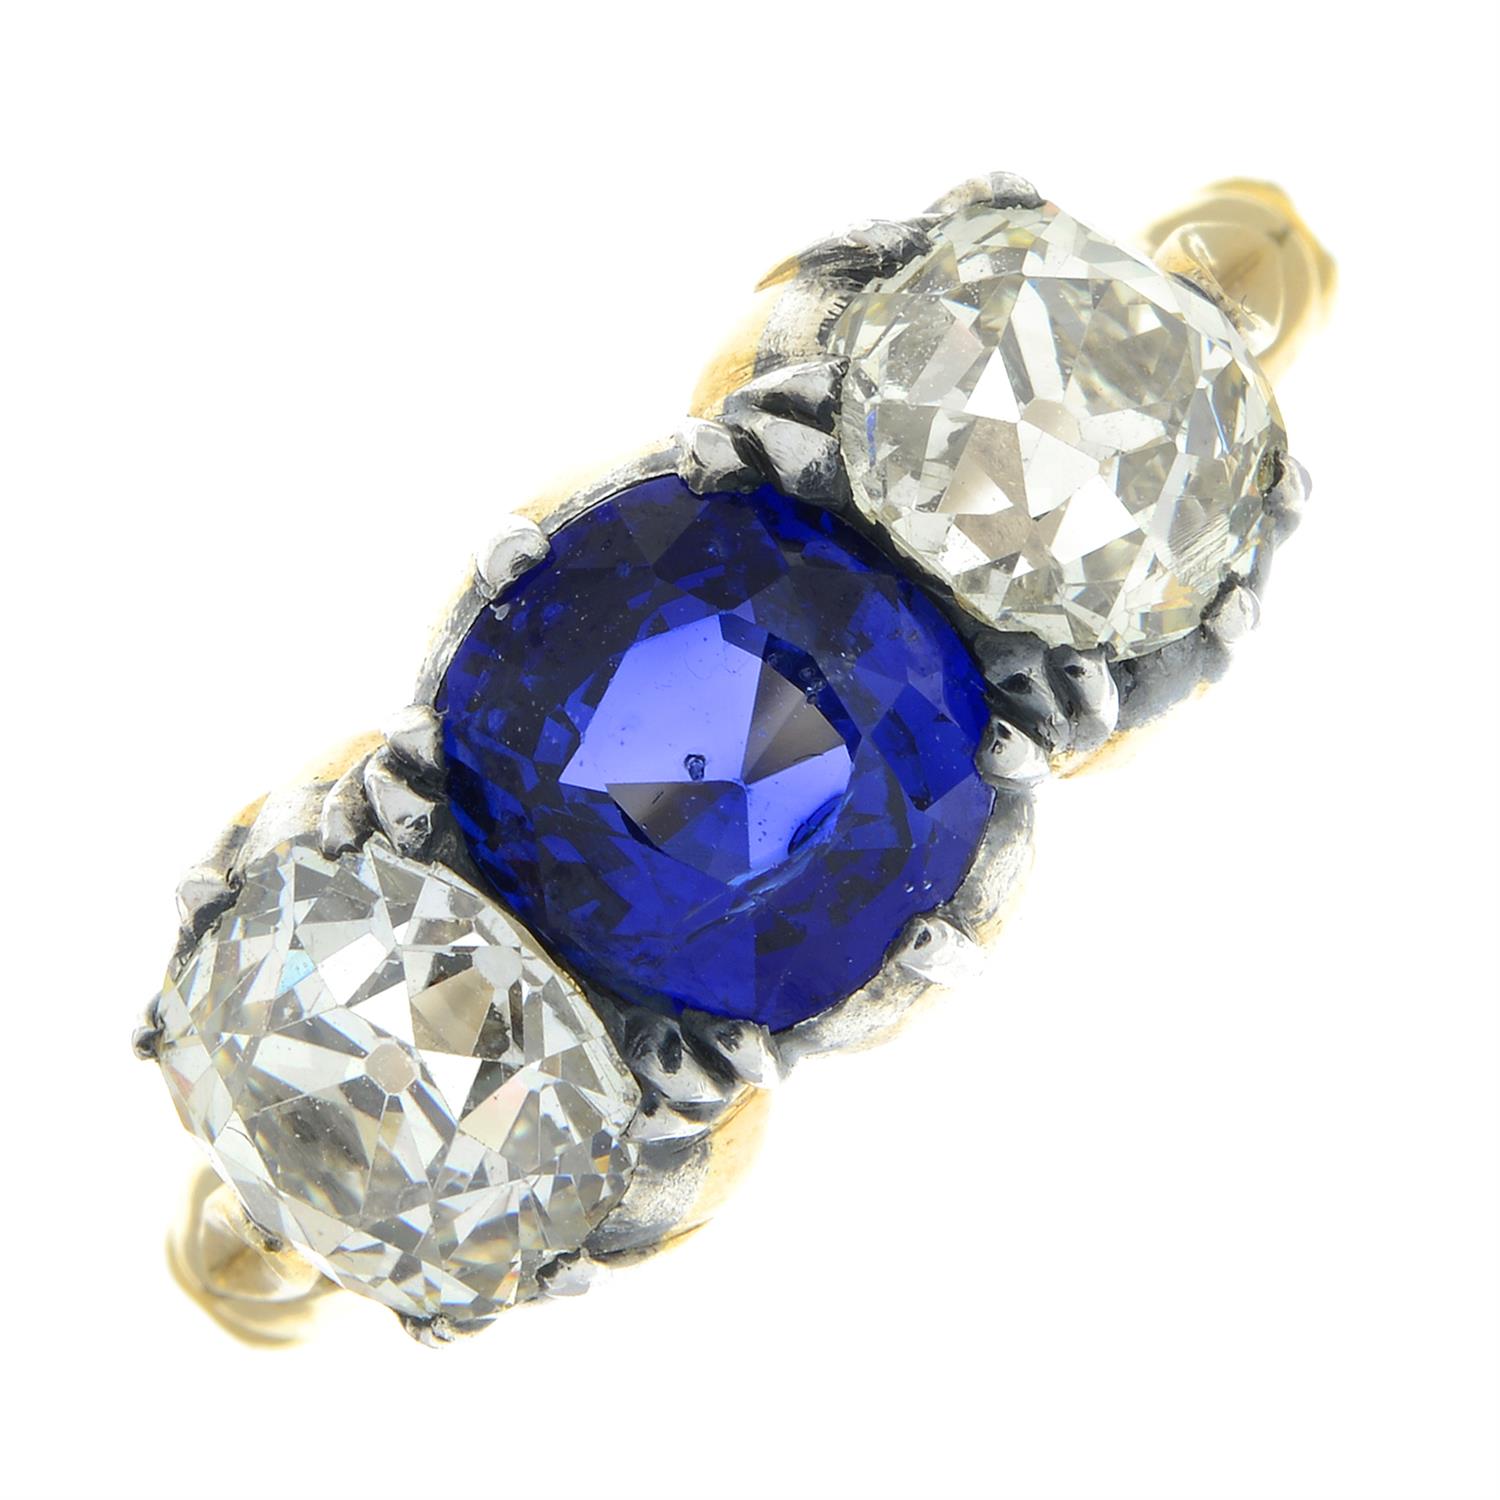 Late 19th century sapphire and old-cut diamond ring - Image 2 of 5